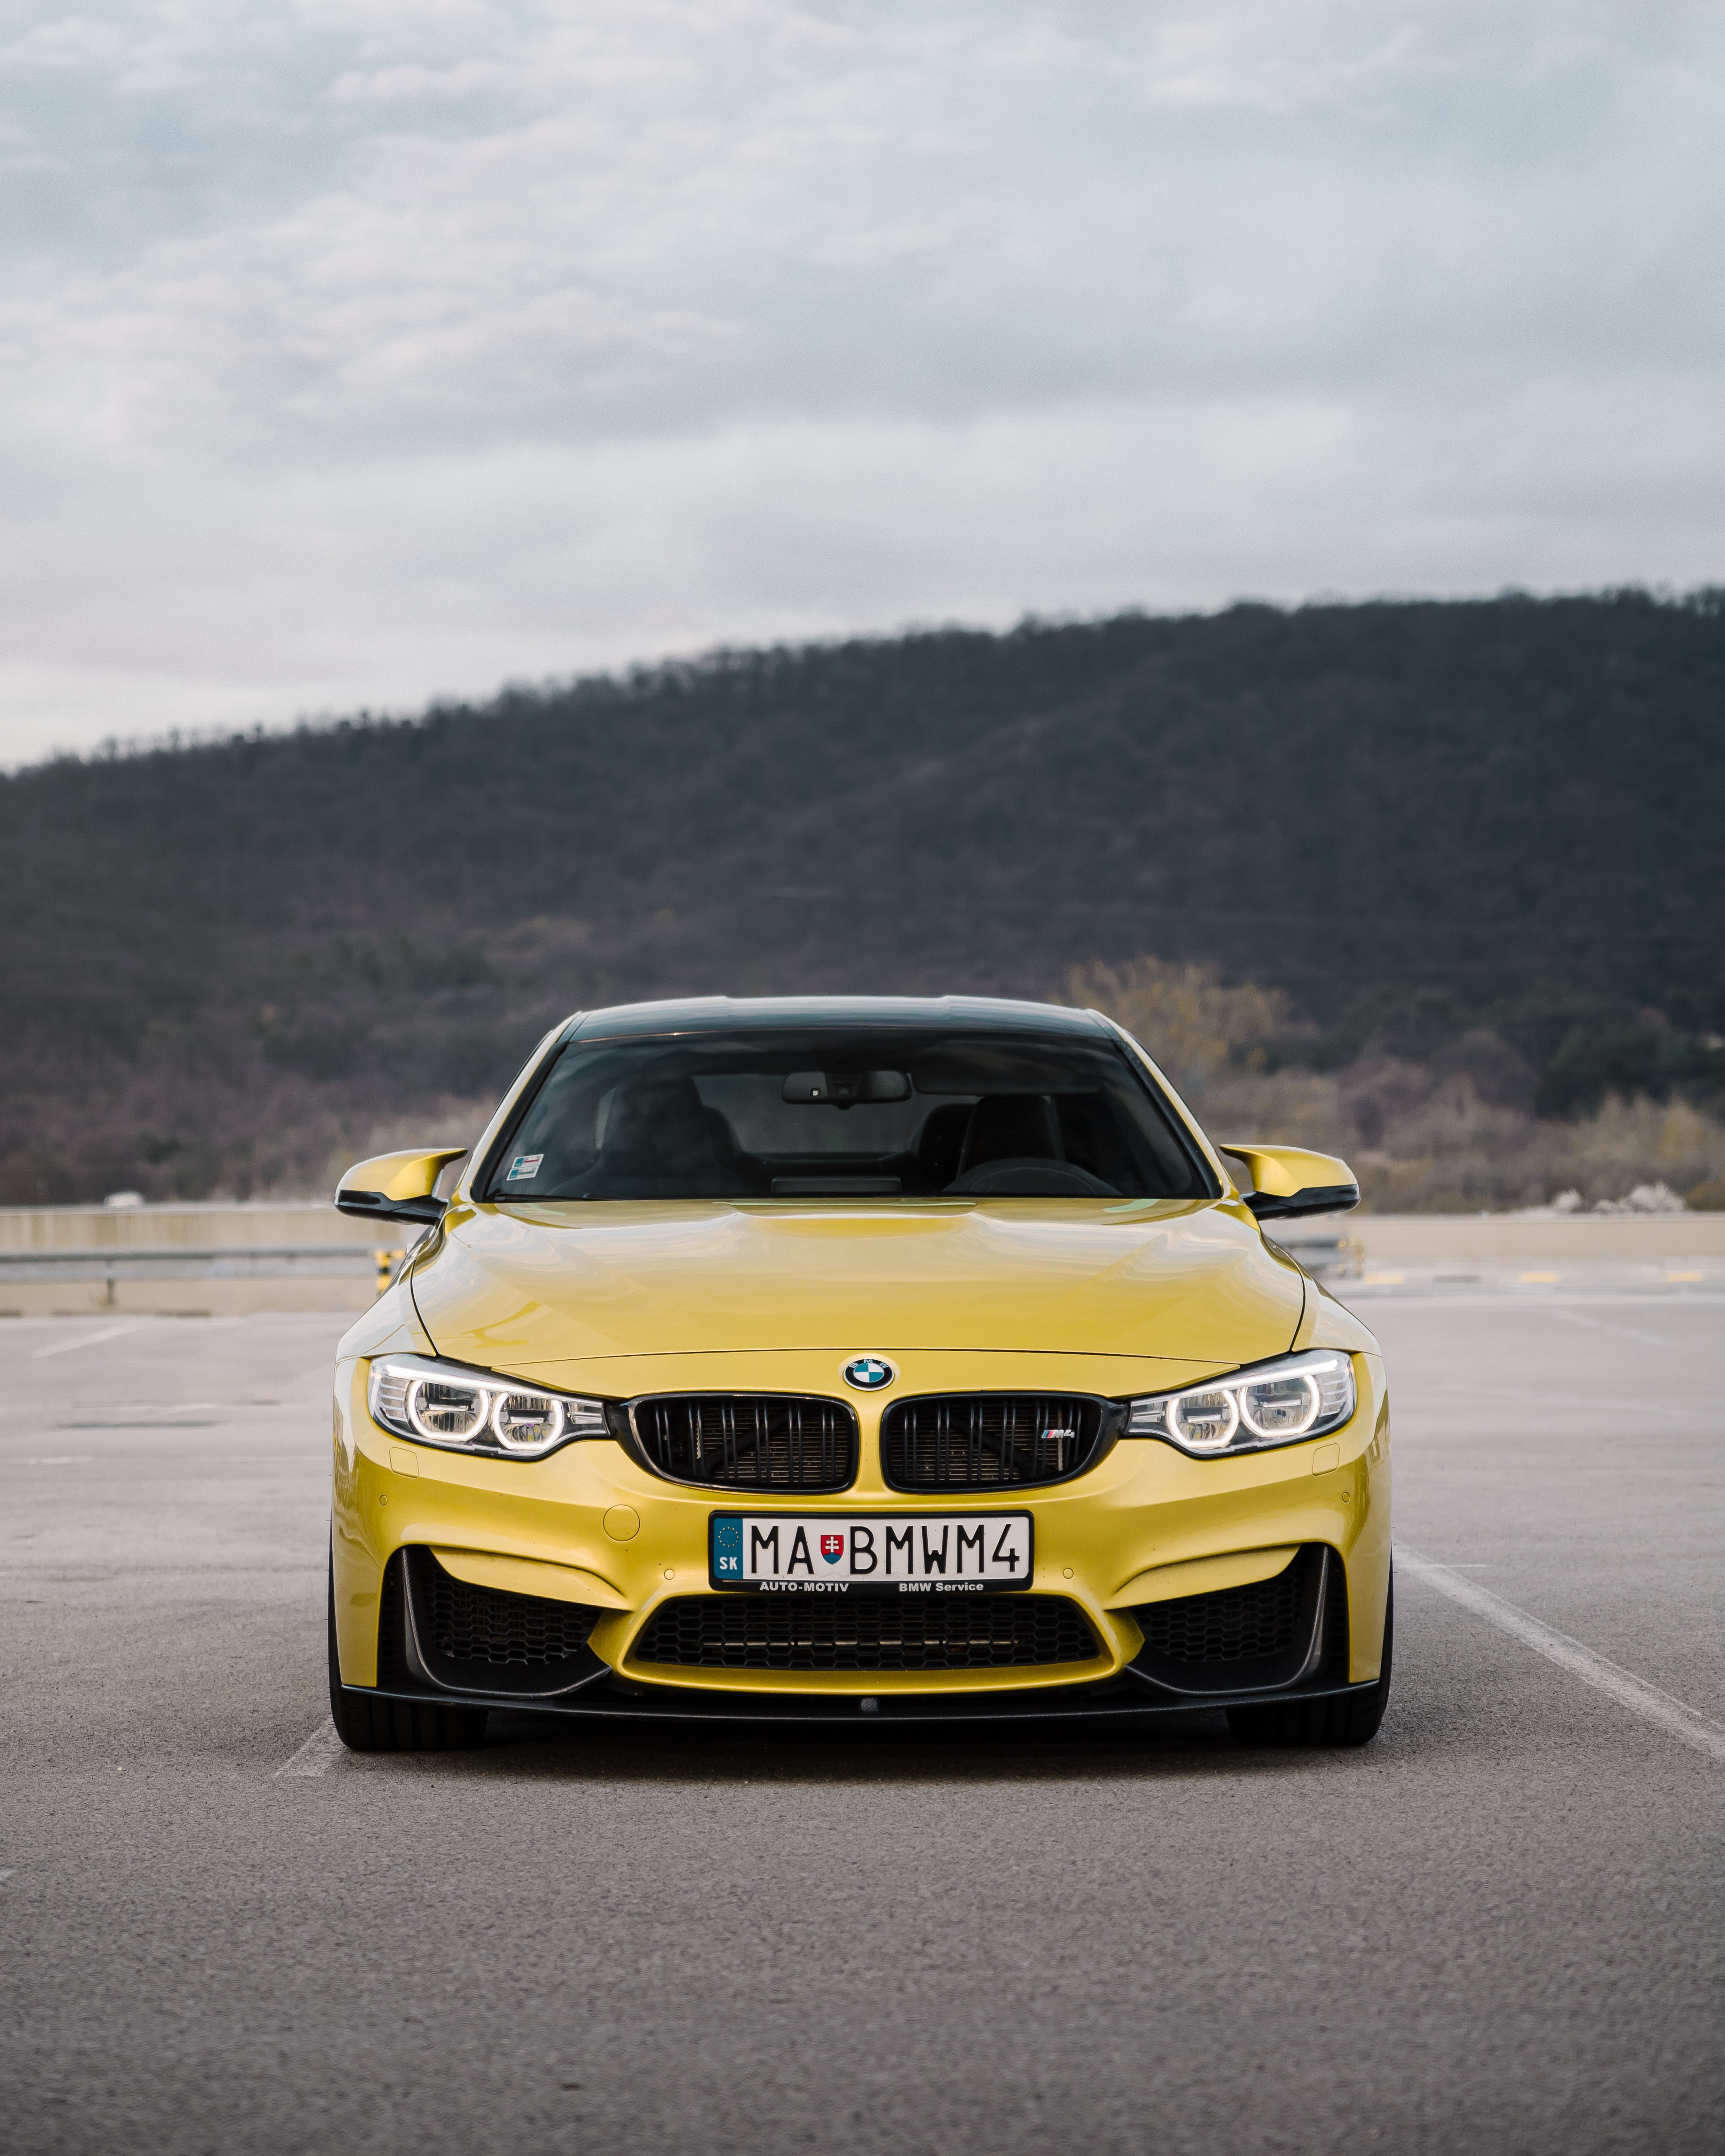 bmw, car, cars, front view, yellow, machine